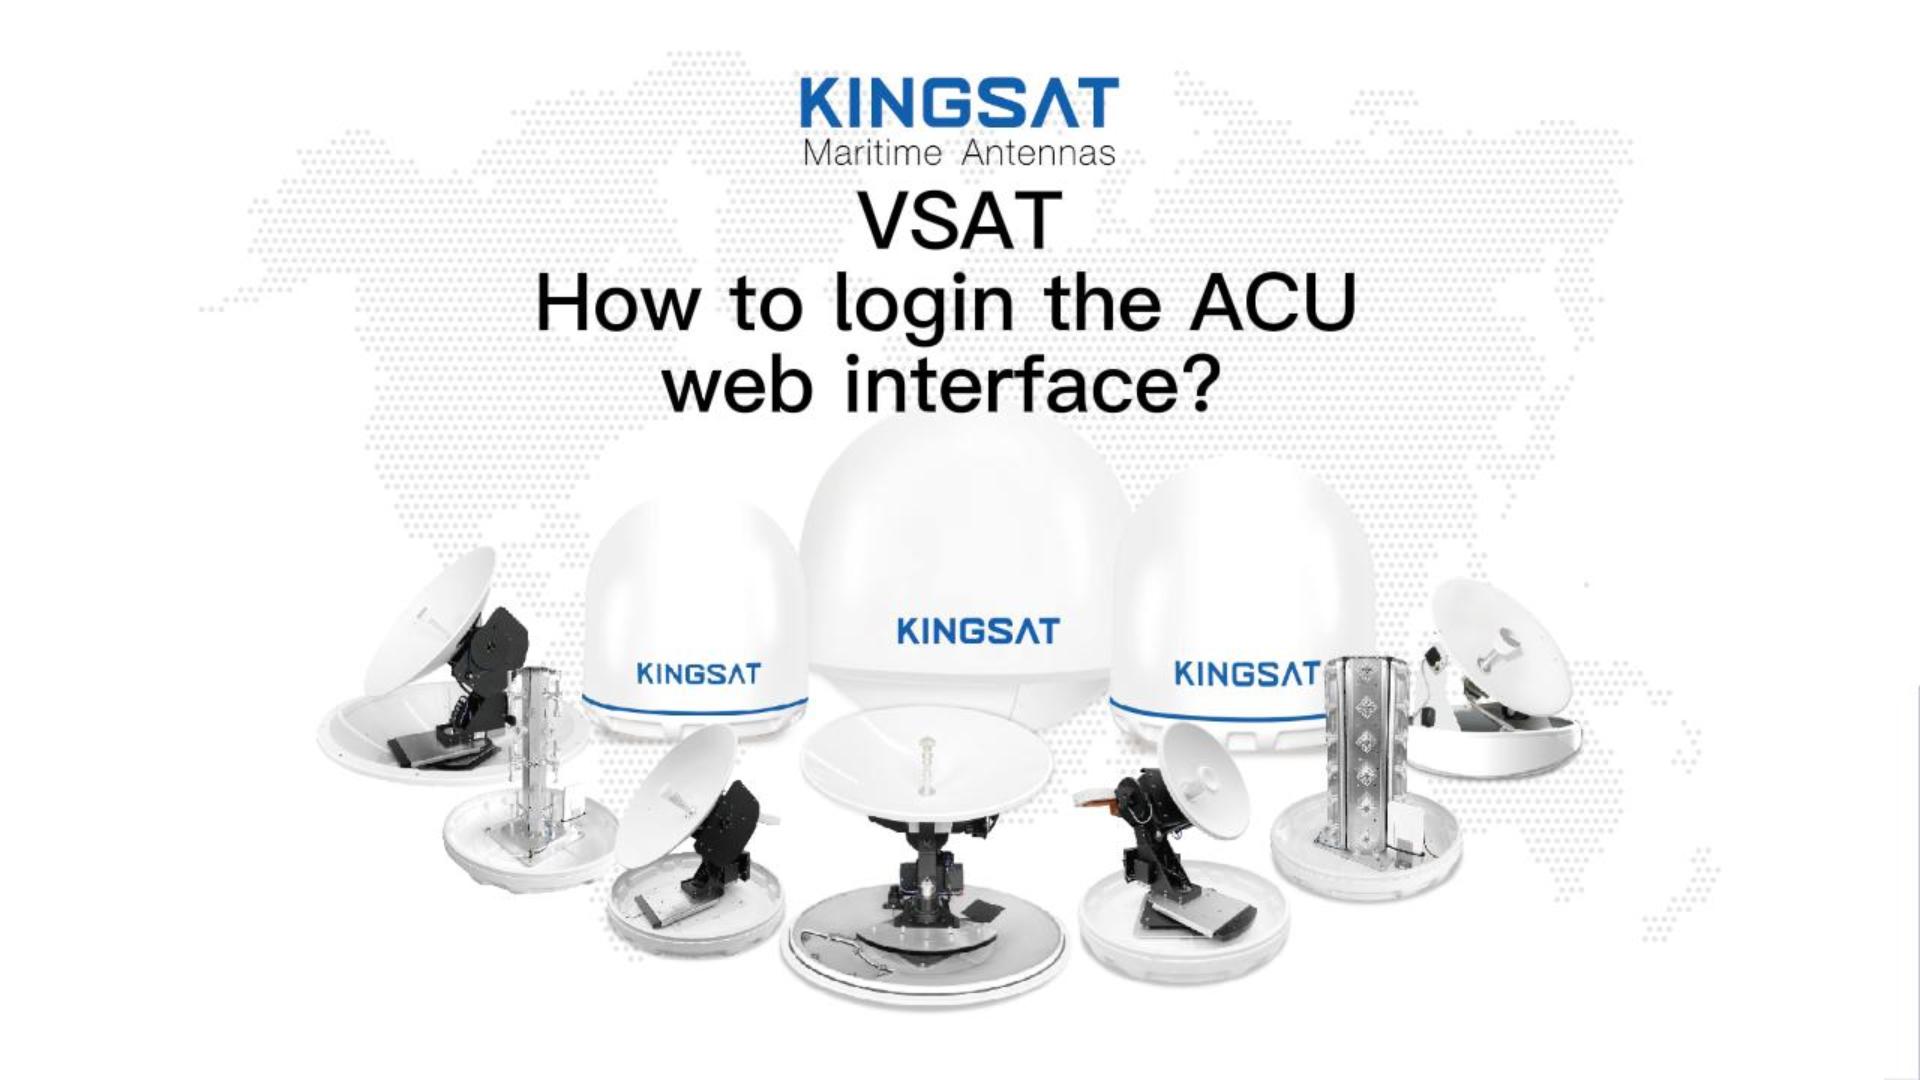 How to login the ACU web interface?